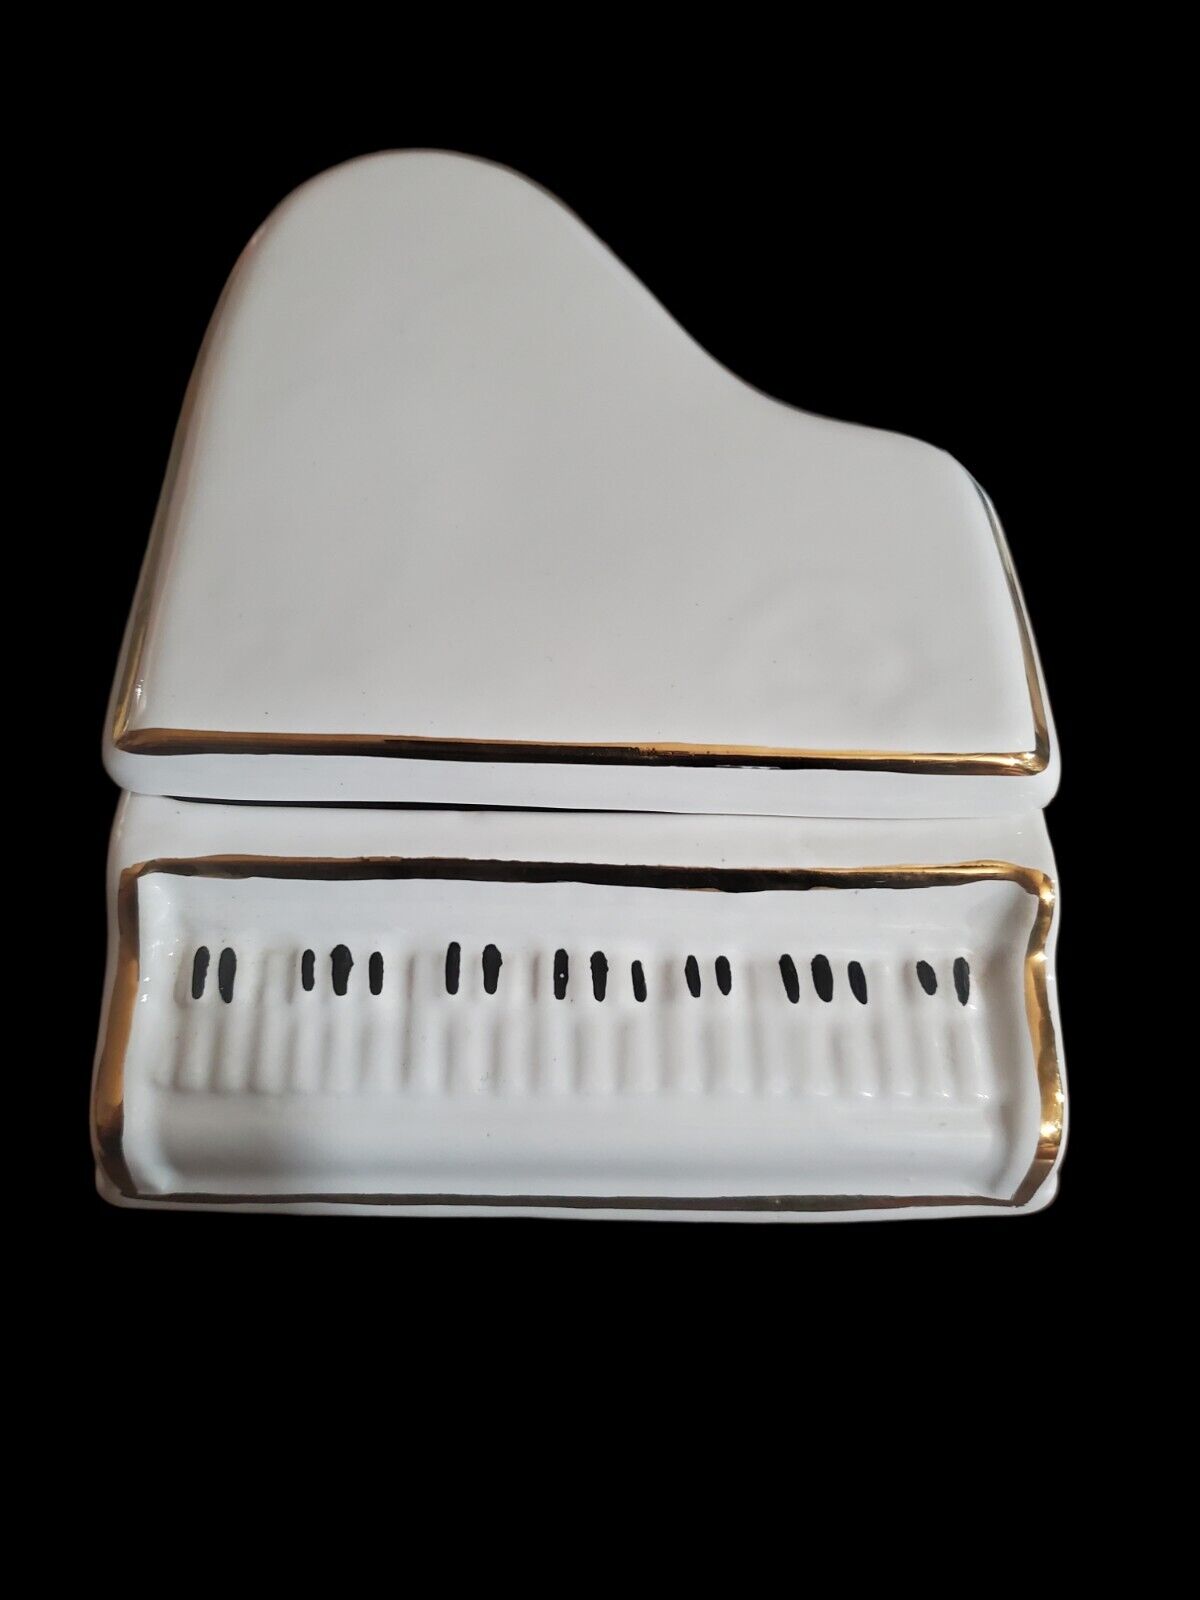 Vintage Ceramic Grand Piano, Hand Crafted For Perugina By Mazzieri Deruta Italy